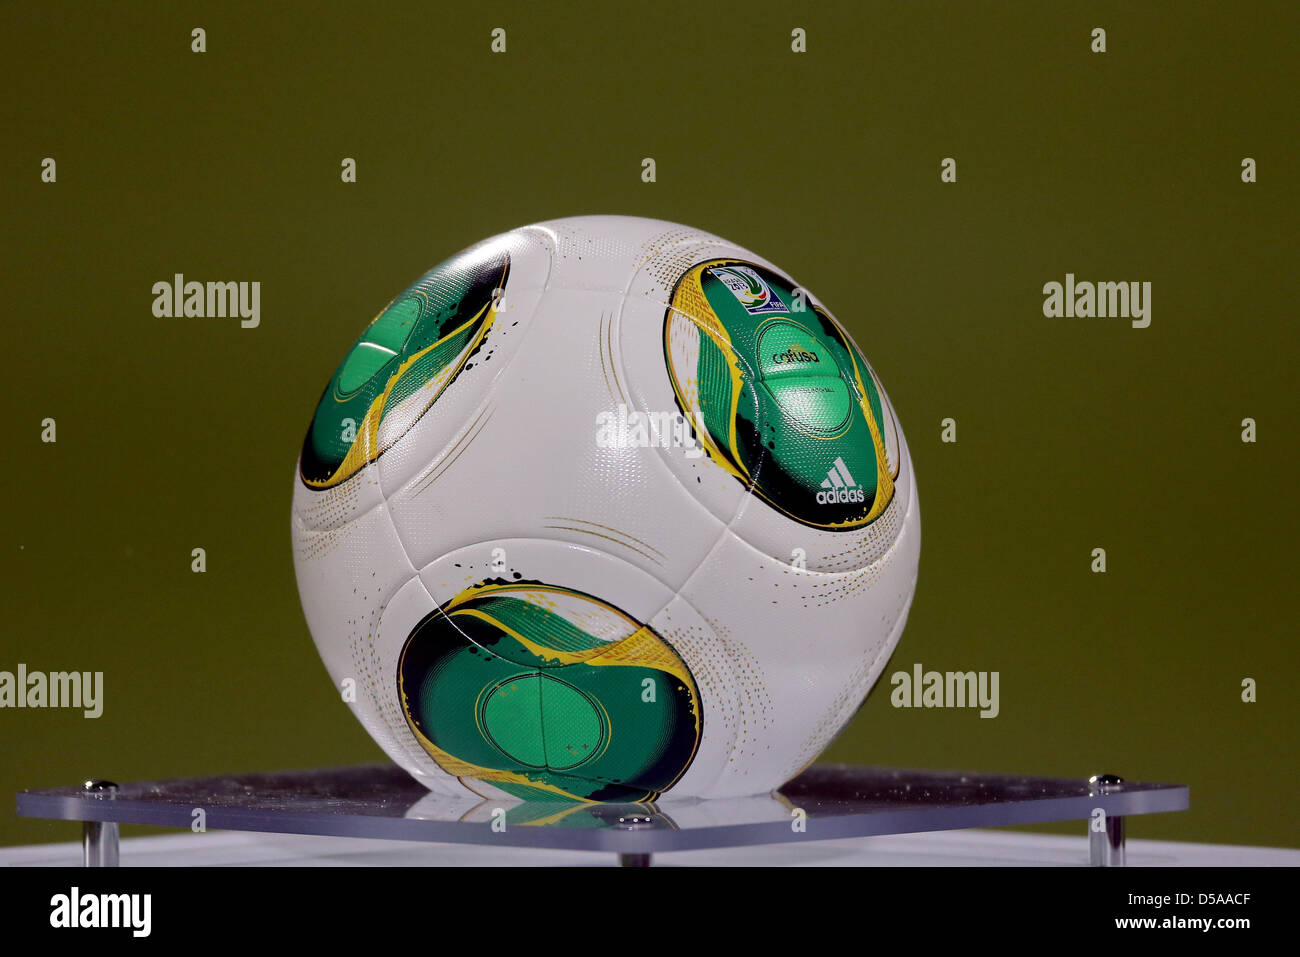 The match ball, named "Cafusa", designed for the football world  championships in Brasil 2014, is seen prior to the FIFA World Cup 2014  qualification group C soccer match between Germany and Kazakhstan